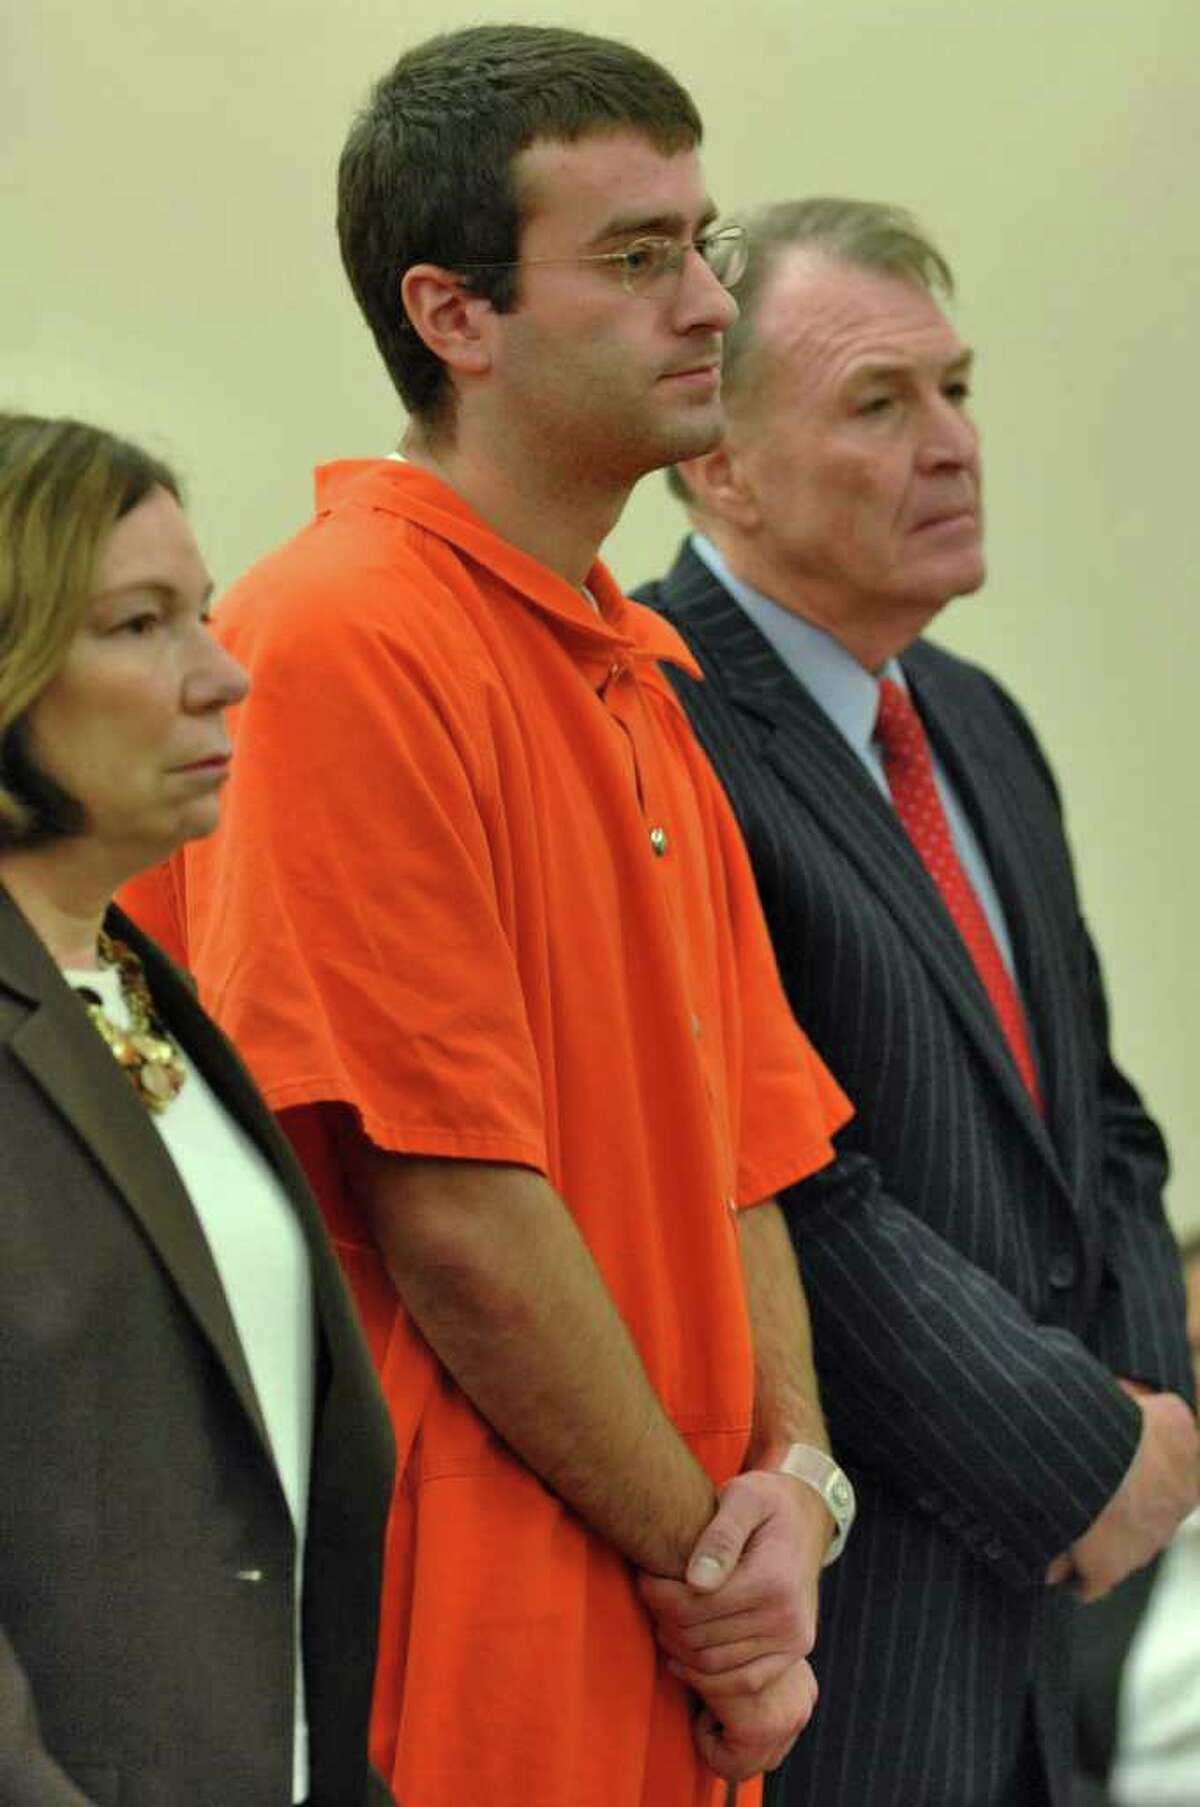 Christopher Porco, center, stands next to his attorneys, Laurie Shanks and Terence L. Kindlon, as he is sentenced in December 2006 to 46 years to life in prison for the murder of his father and the attempted murder of his mother. (Times Union/Philip Kamrass)